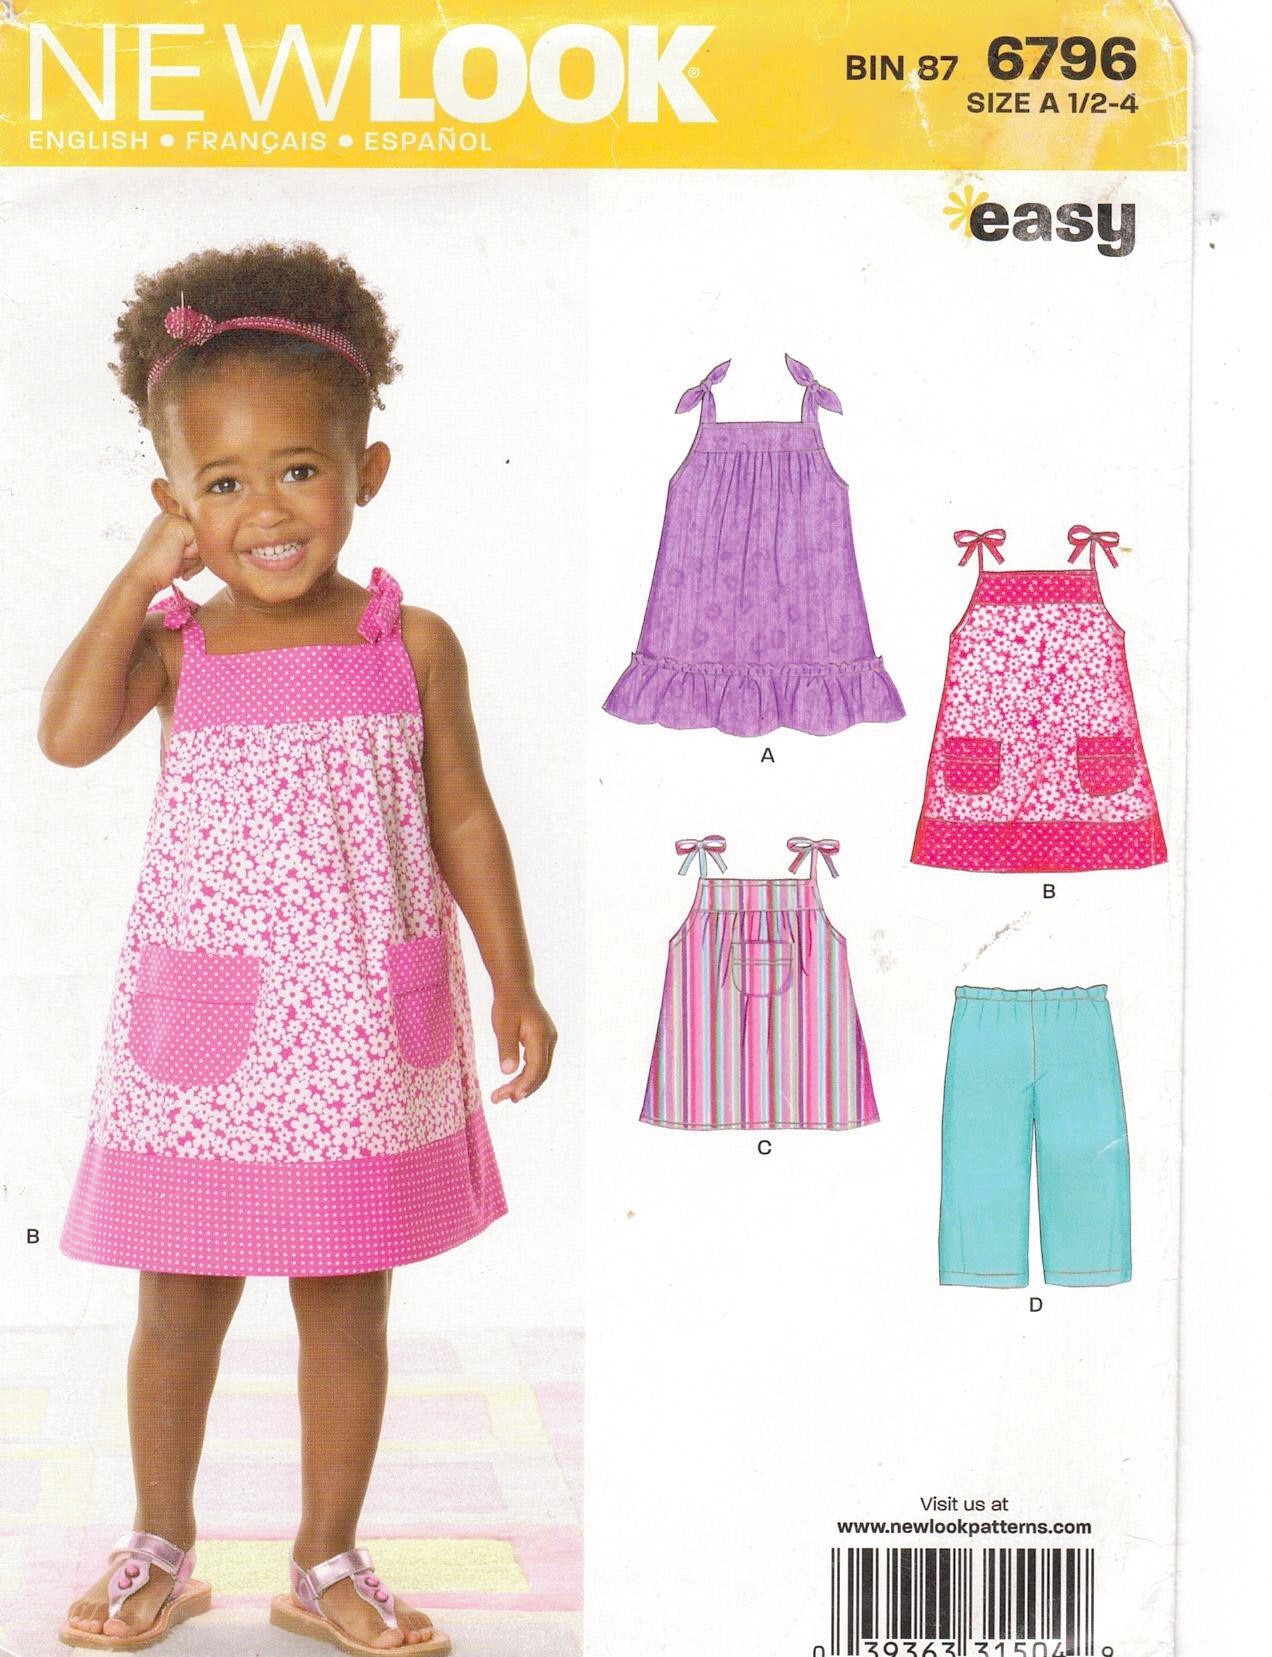 New Look Sewing Pattern N6756 Misses' Shorts and Pants 6756